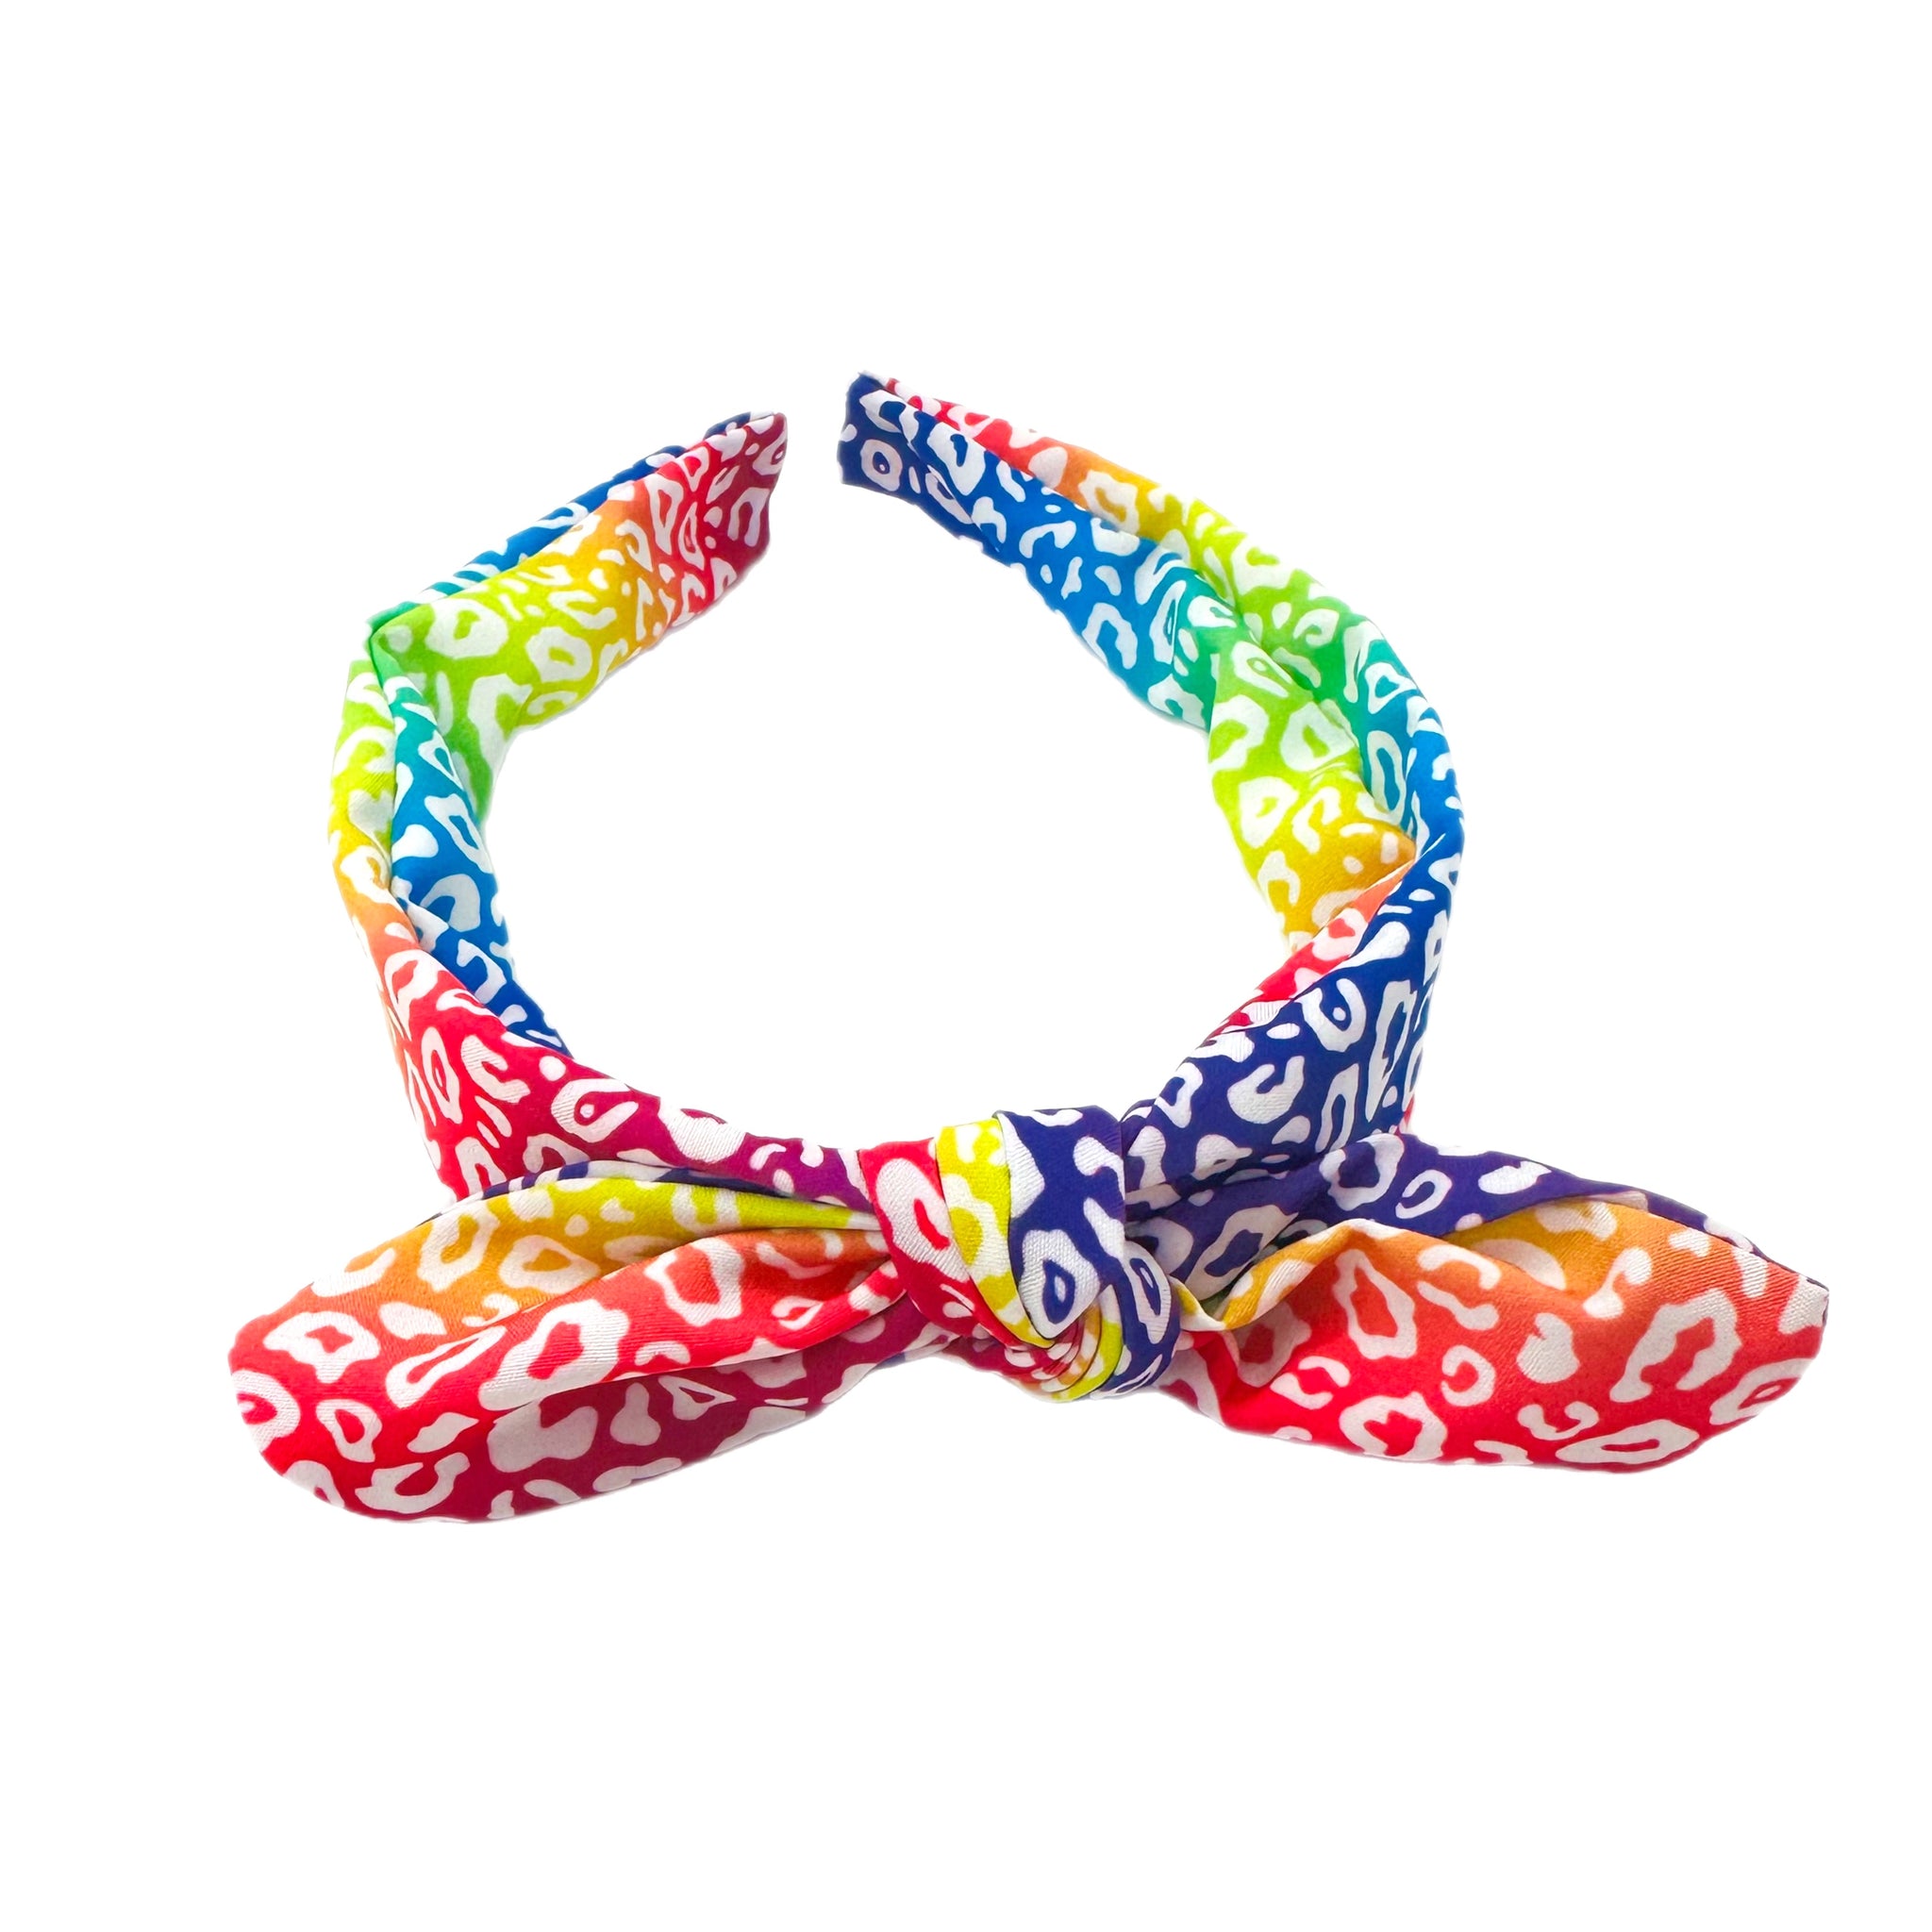 Ombre Rainbow Leopard Hand Tied Knotted Bow Headband